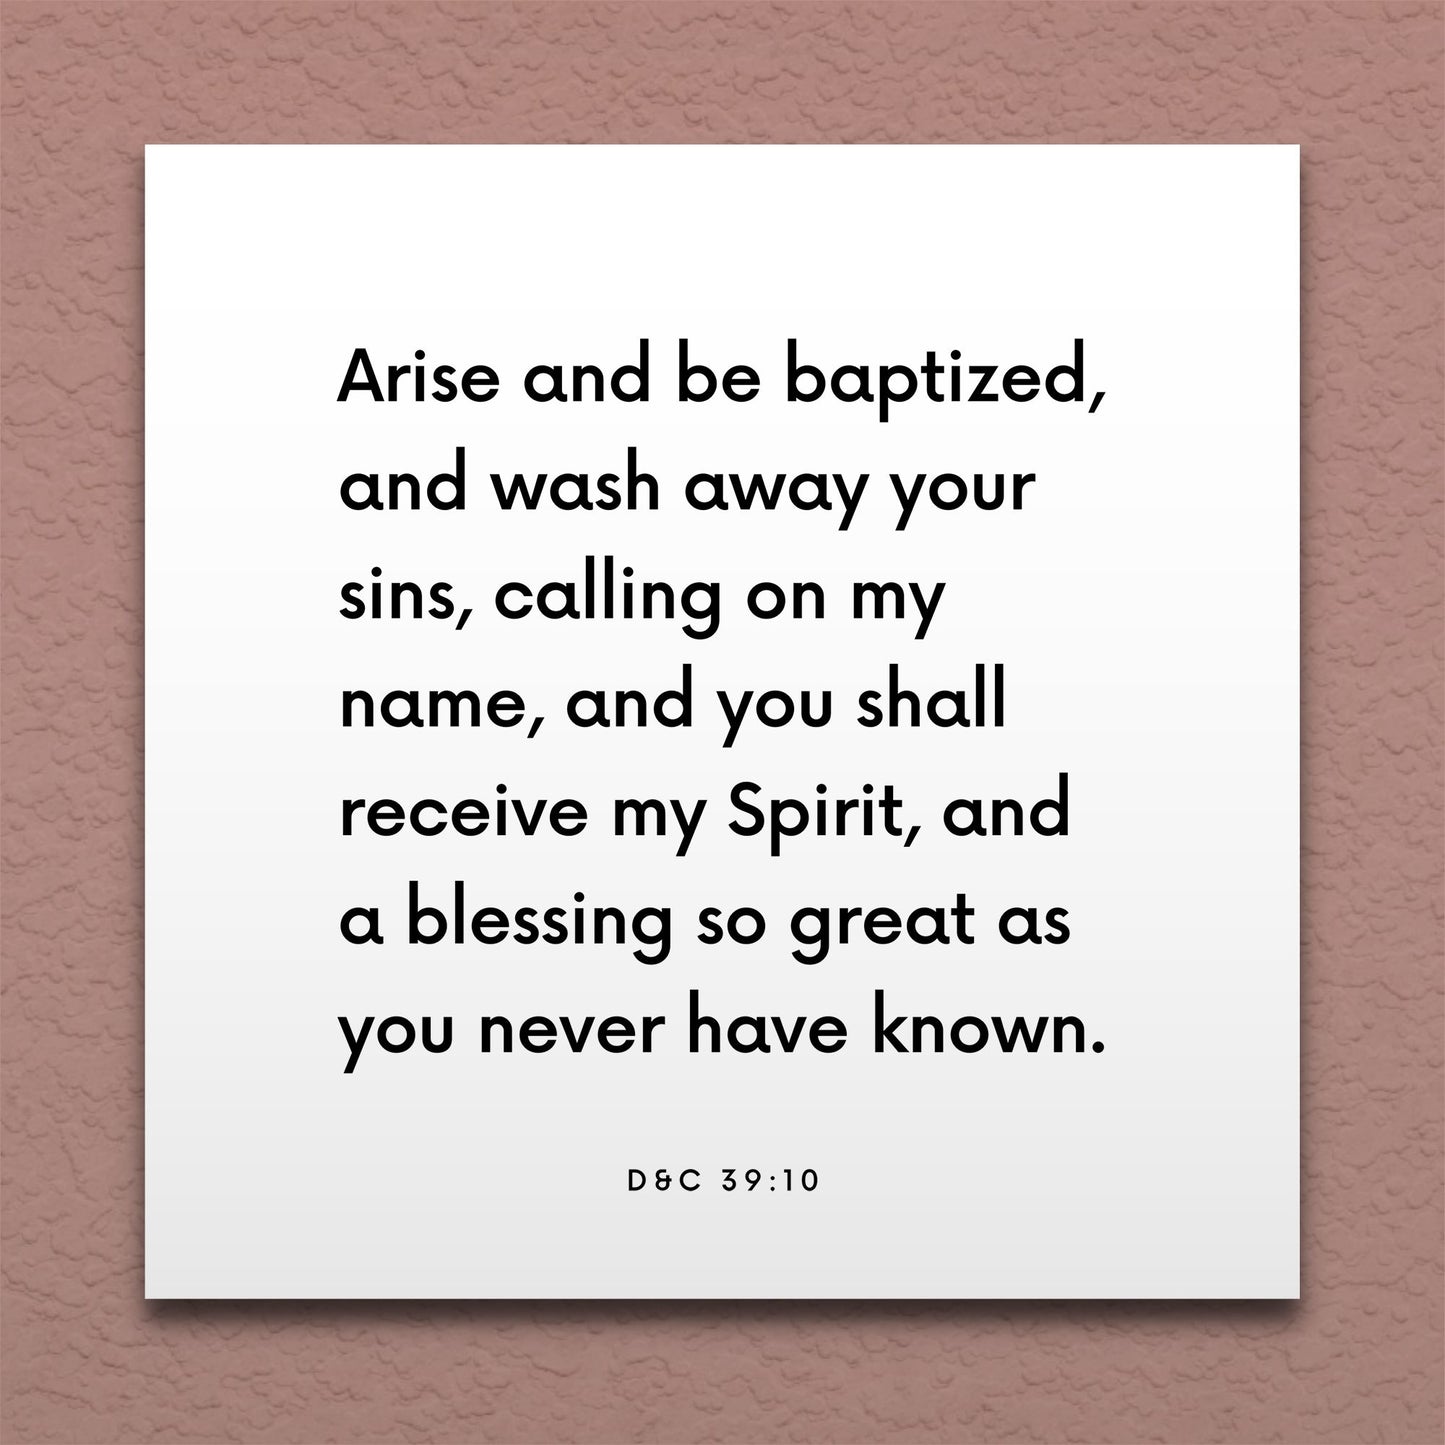 Wall-mounted scripture tile for D&C 39:10 - "Arise and be baptized, and wash away your sins"